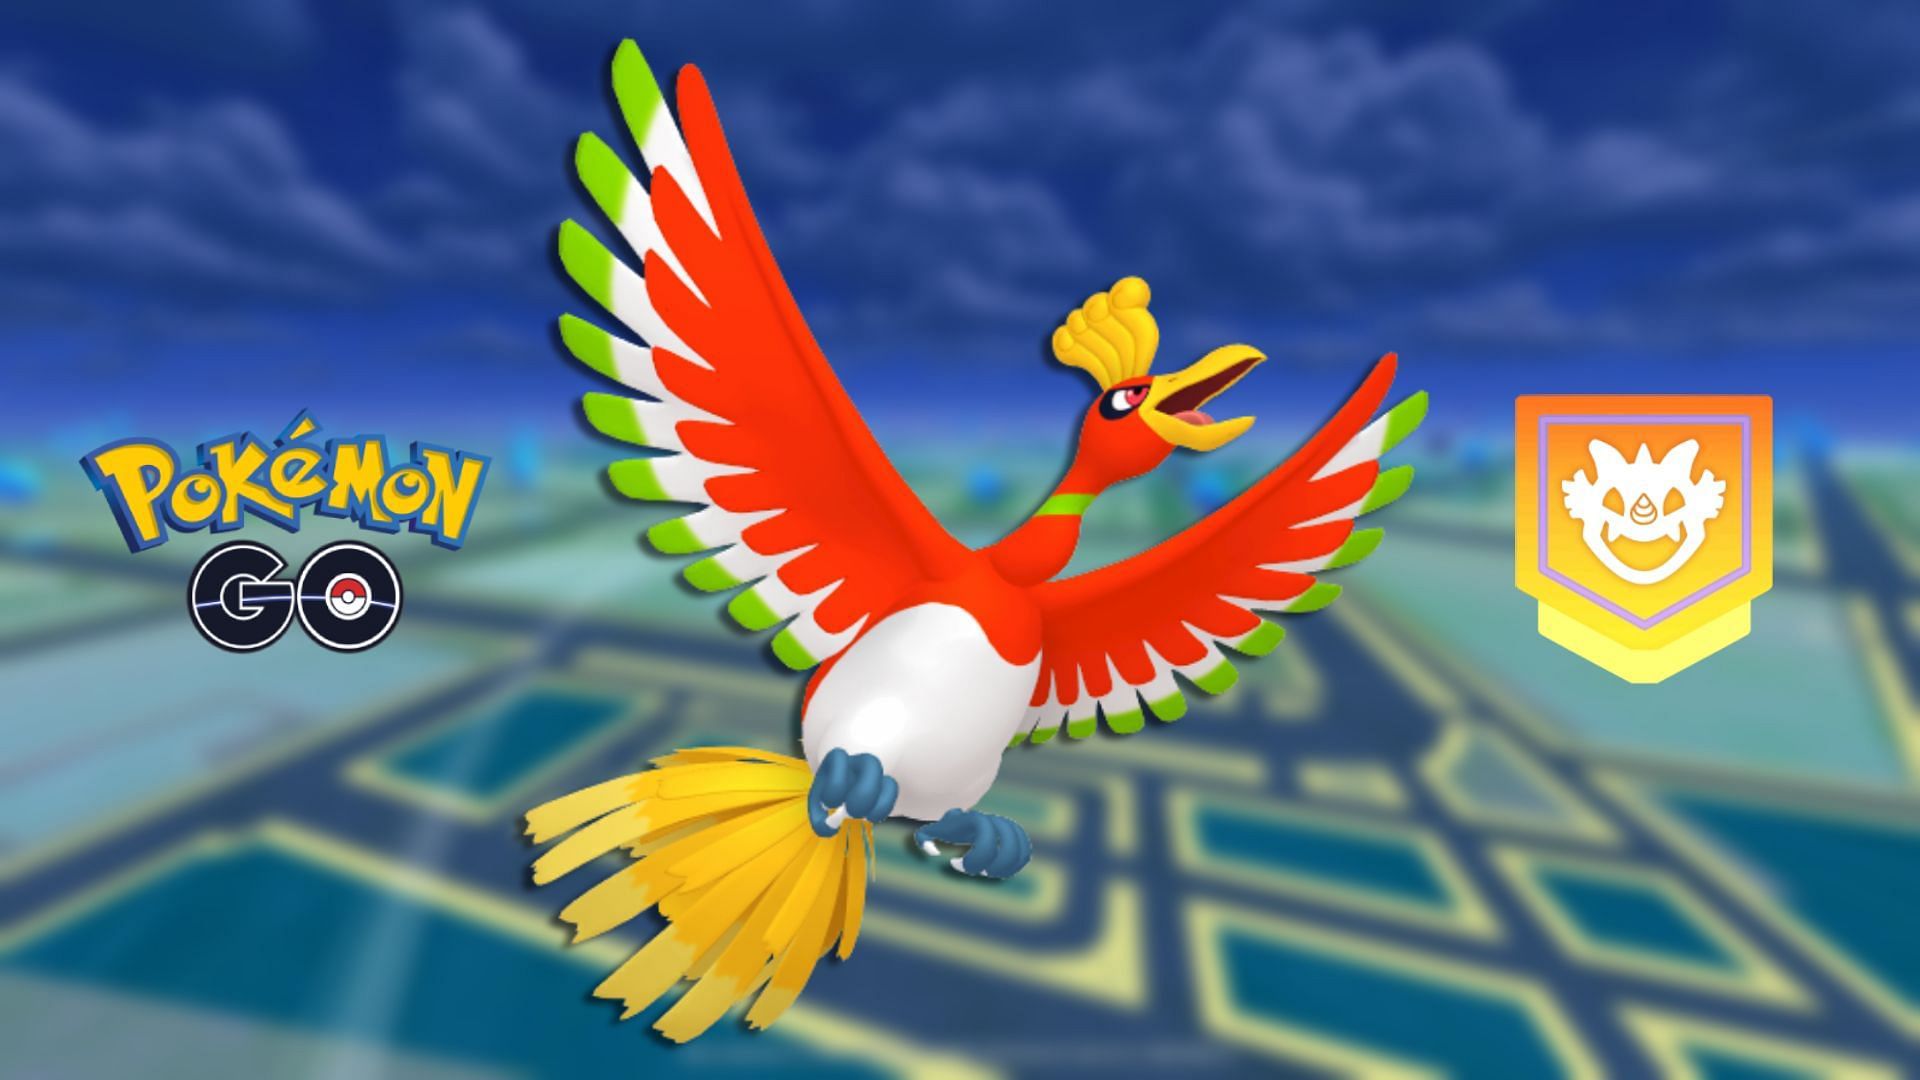 How to best prepare for Ho-Oh Raid Hour in Pokemon GO on March 8